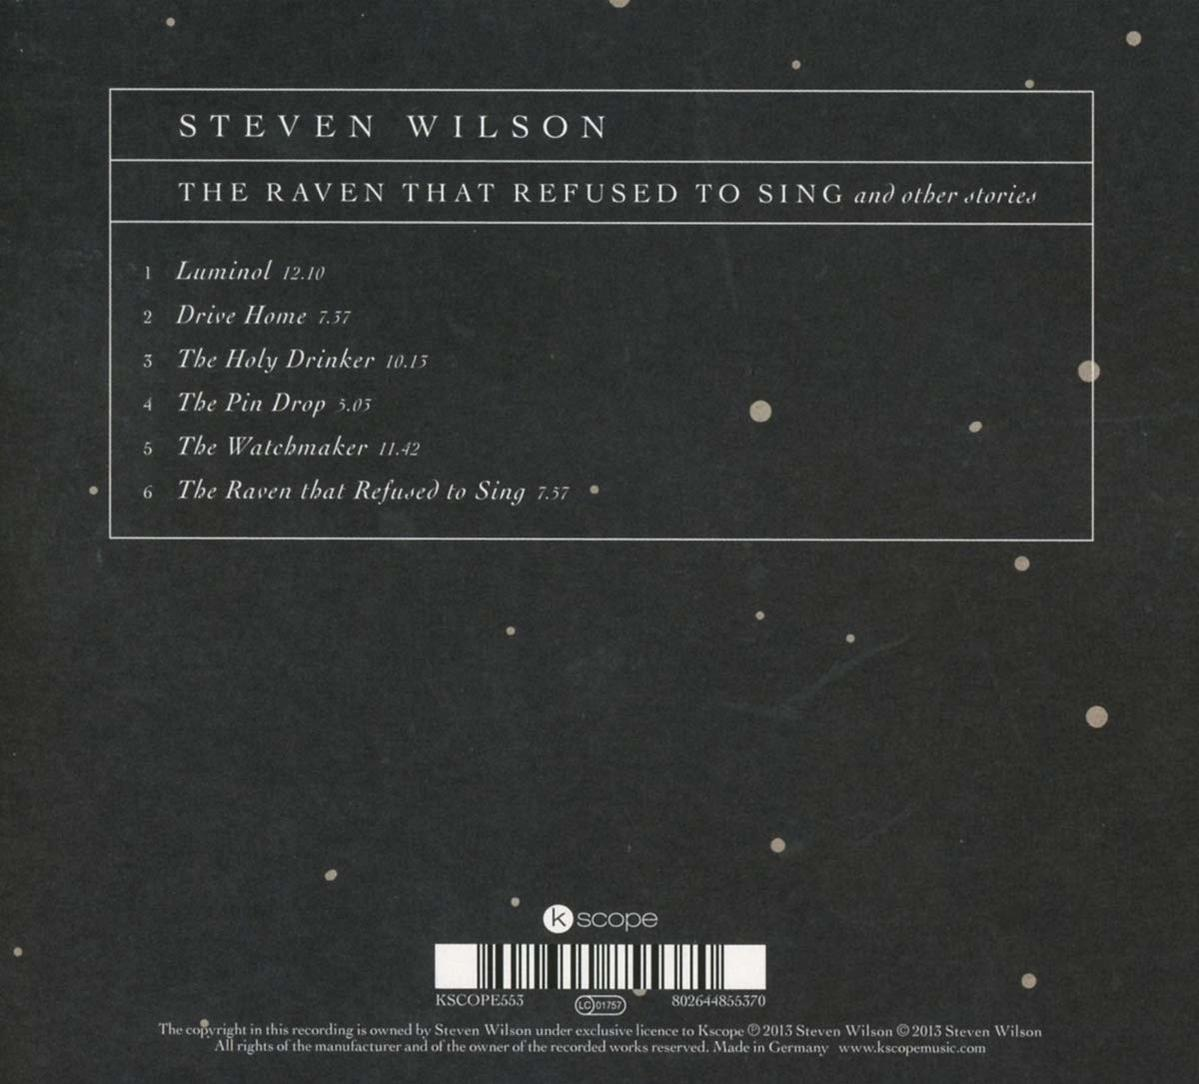 - Refused Blu-ray Sing Disc) - Steven To The Raven That + Wilson (CD